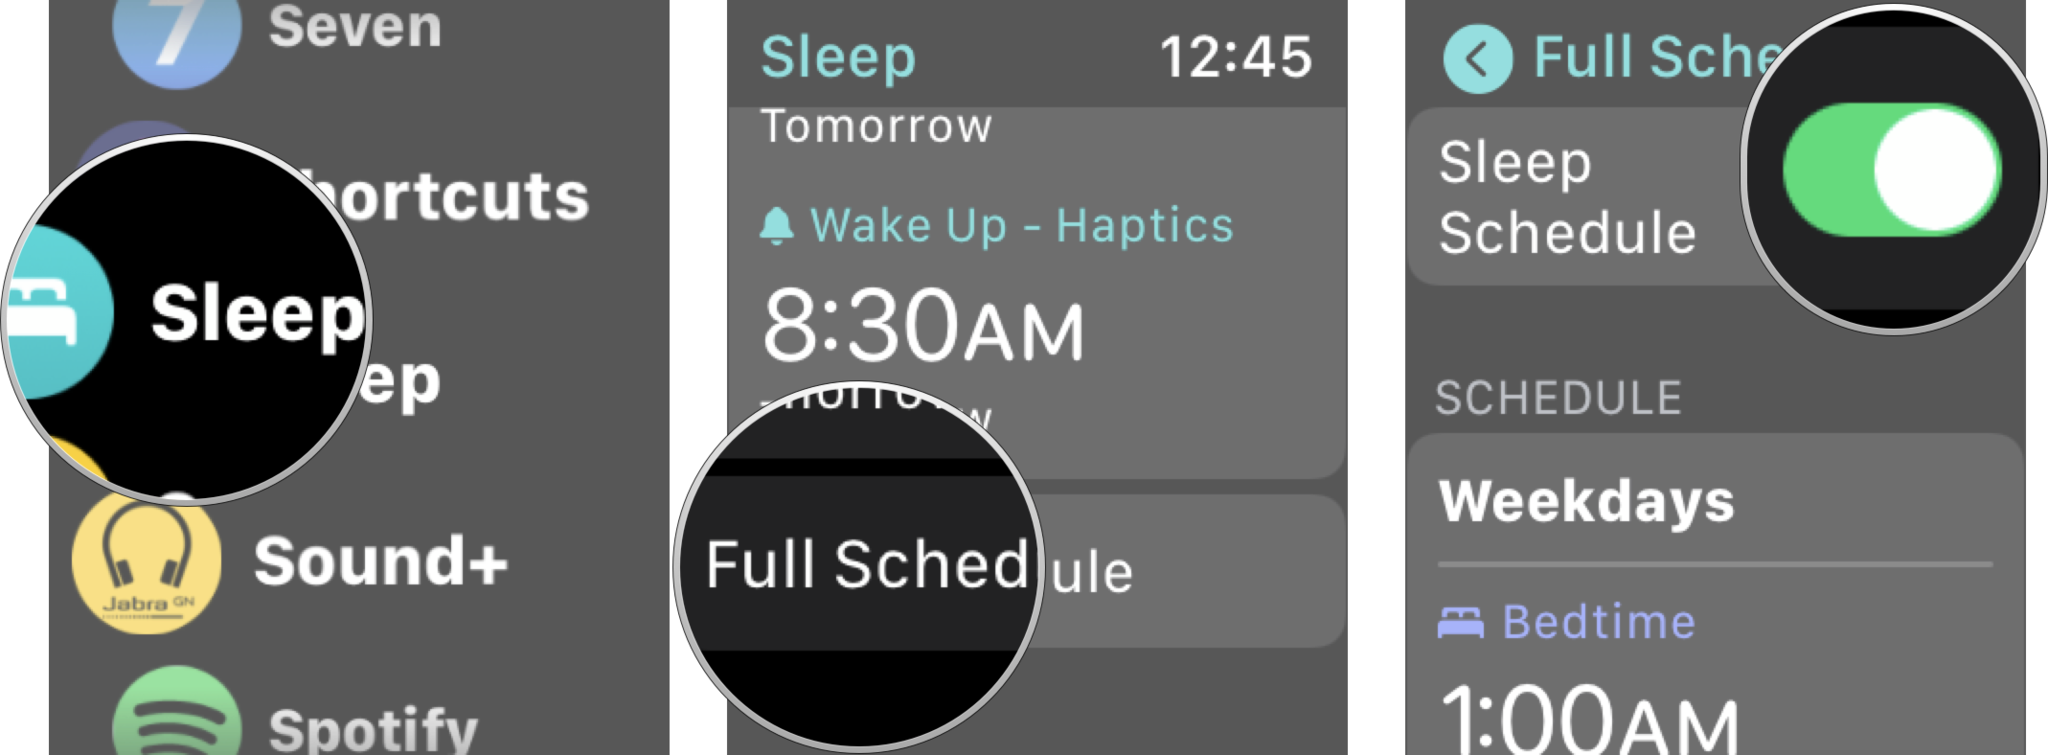 Turn Off Sleep Schedule In Sleep App On Apple Watch: Launch sleep app on your Apple Watch, tap full schedule, and then tap the sleep schedule o/off switch to your desired position. 